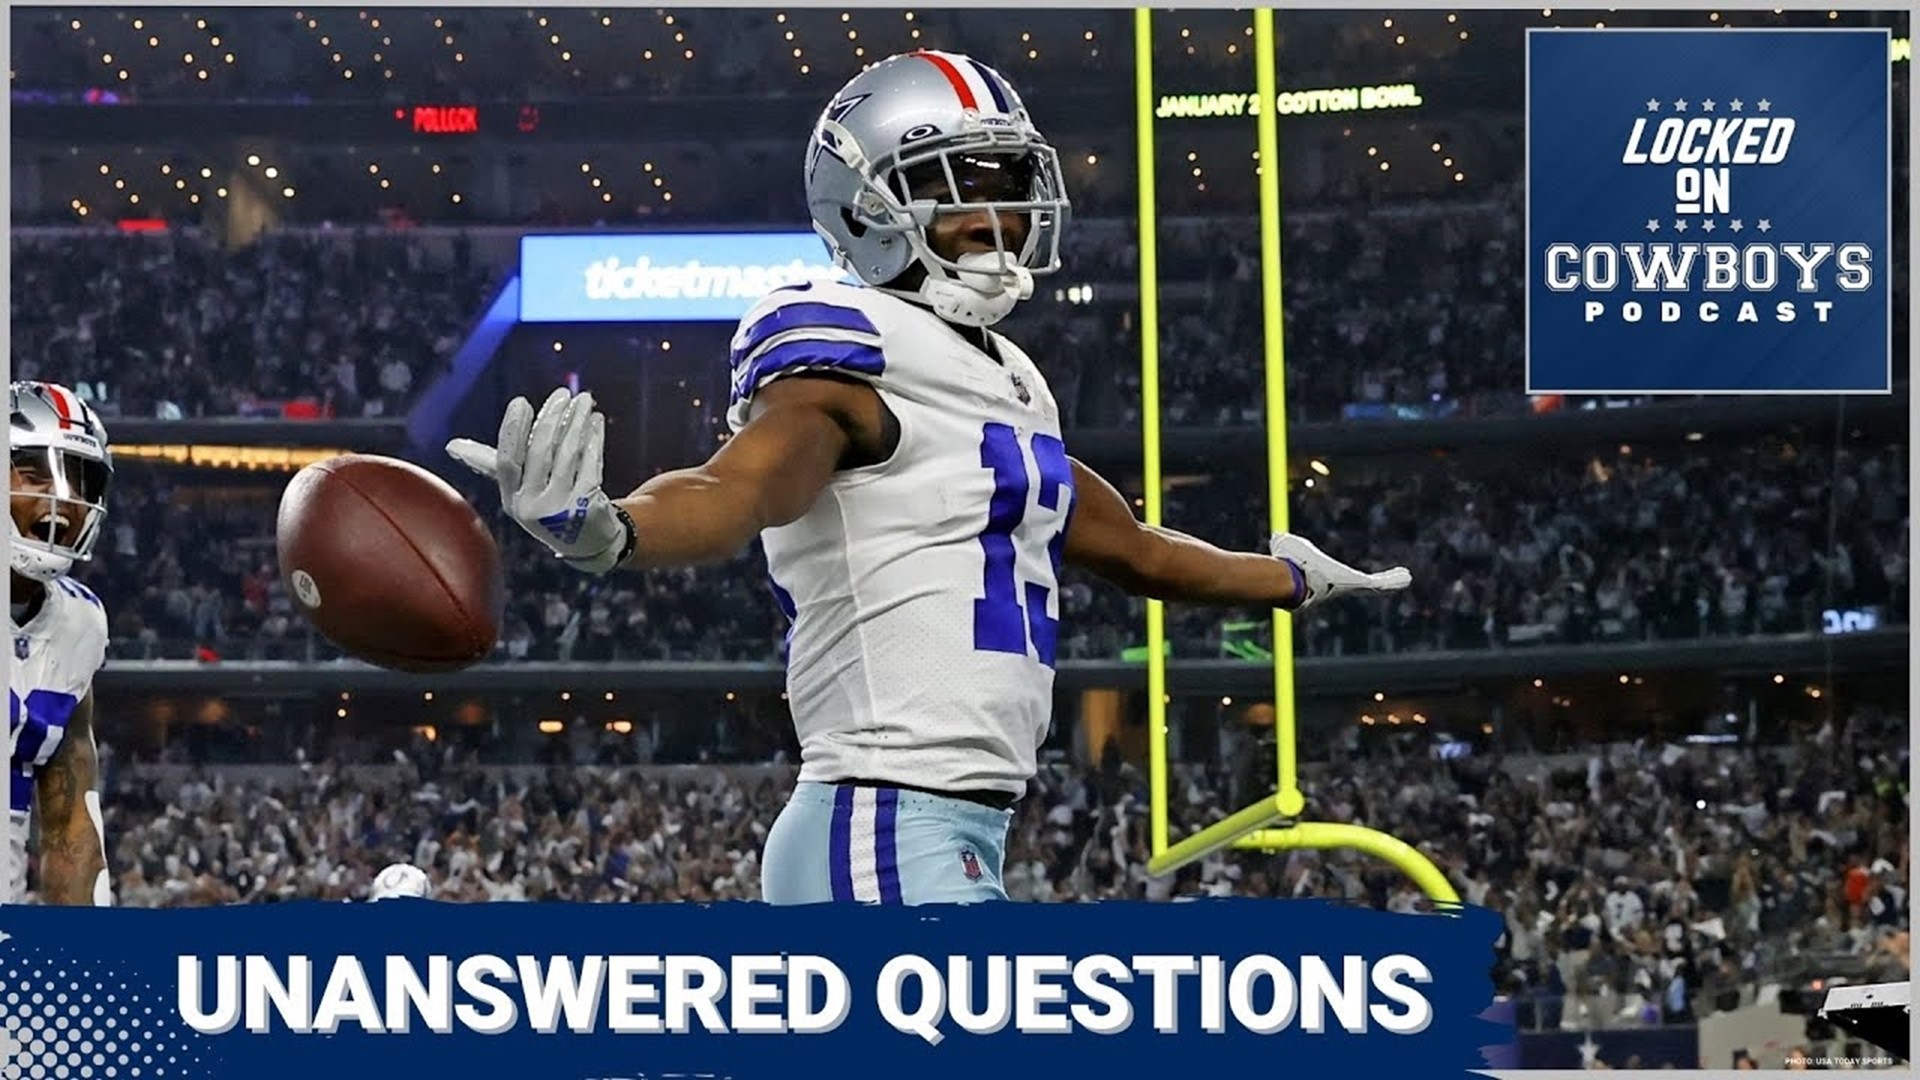 Marcus Mosher and Landon McCool discuss the position groups with the most unanswered questions following the 2023 NFL Draft for the Dallas Cowboys.